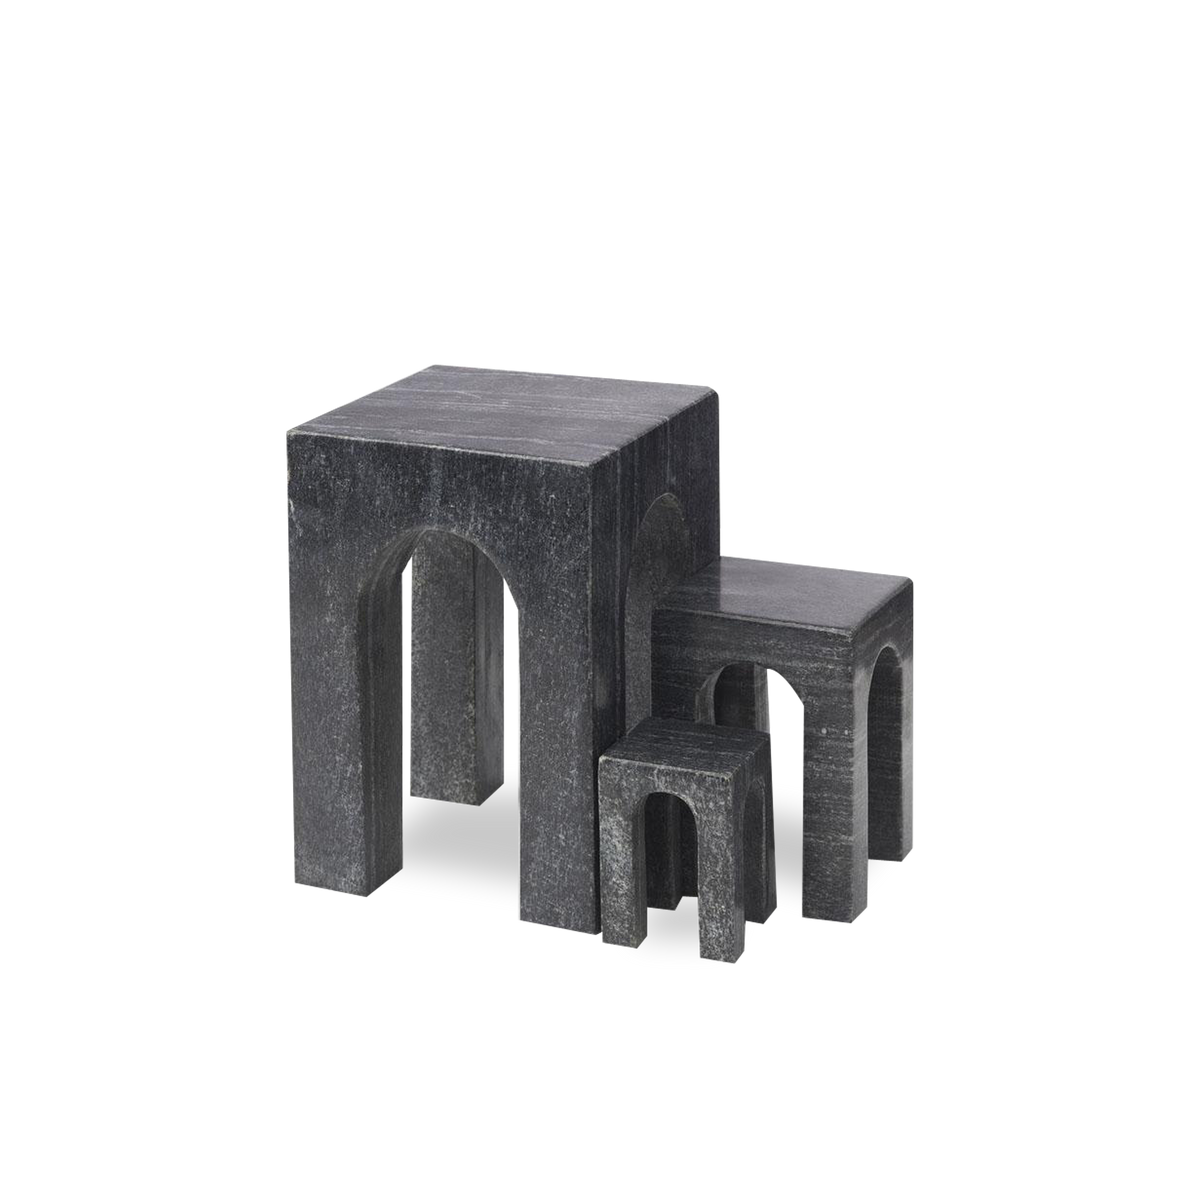 Arkis is three marble objects designed to either function as a bookend or just sculptural pieces for the home.